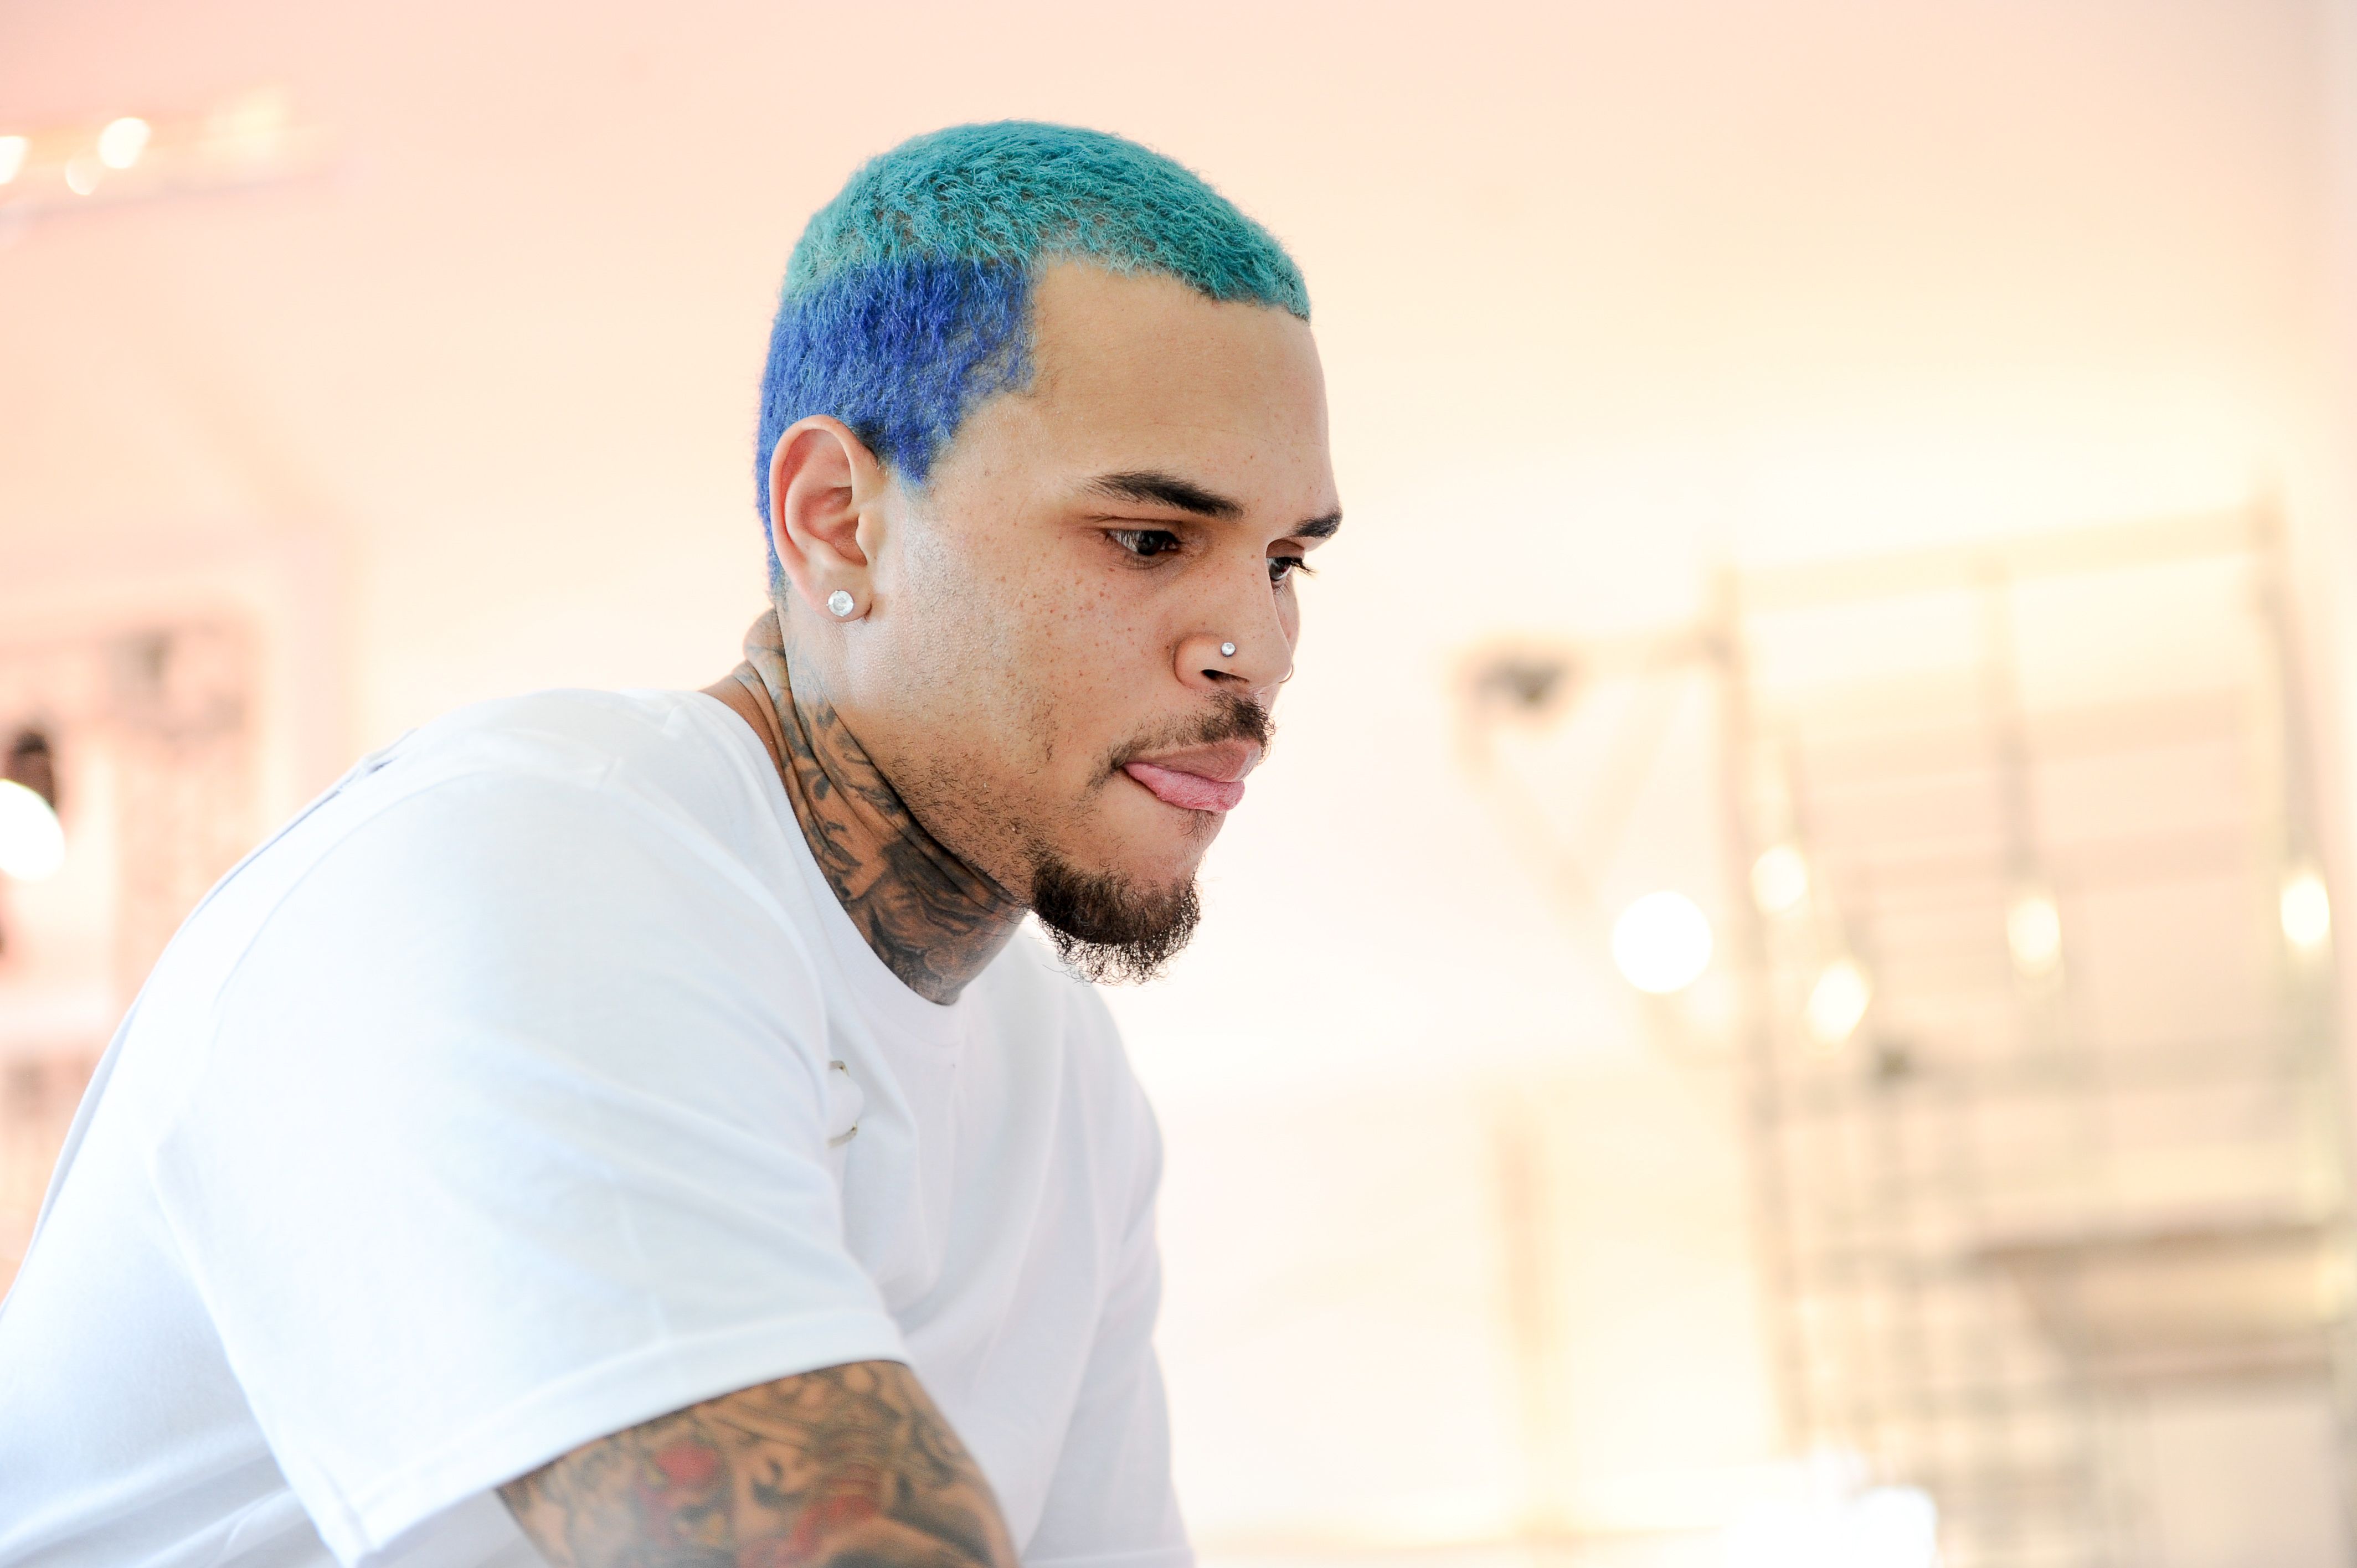 Chris Brown Colorful Hair Wide Wallpaper 20 4256x2832 px